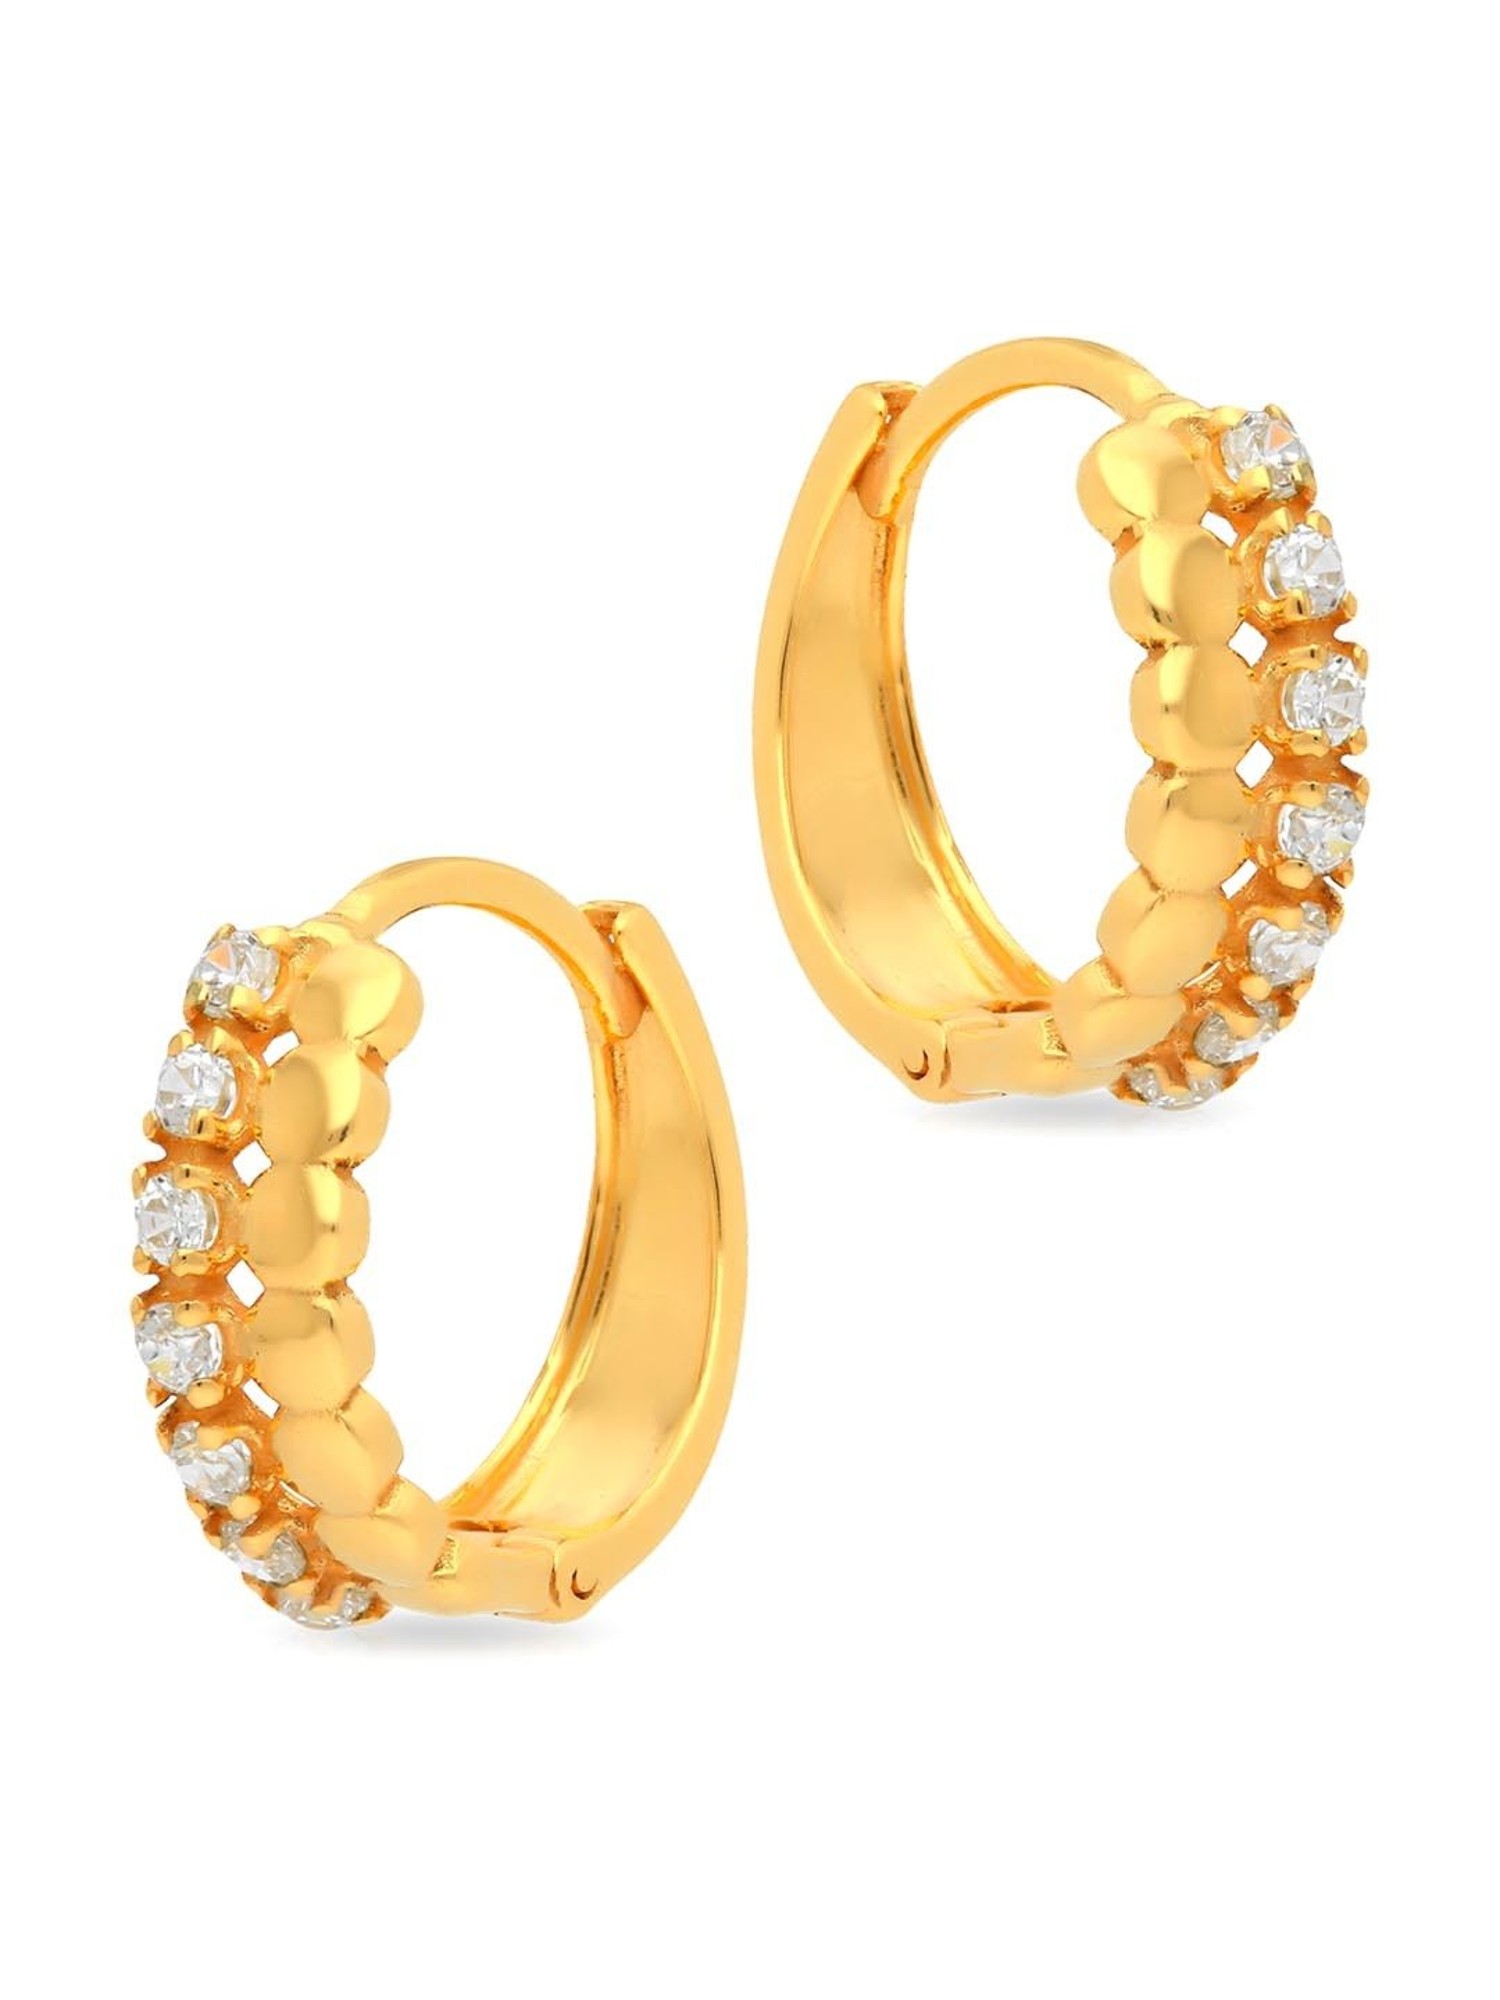 Shop Petite Ruby and Diamond 18k Gold Stud Earring for Women | Gehna